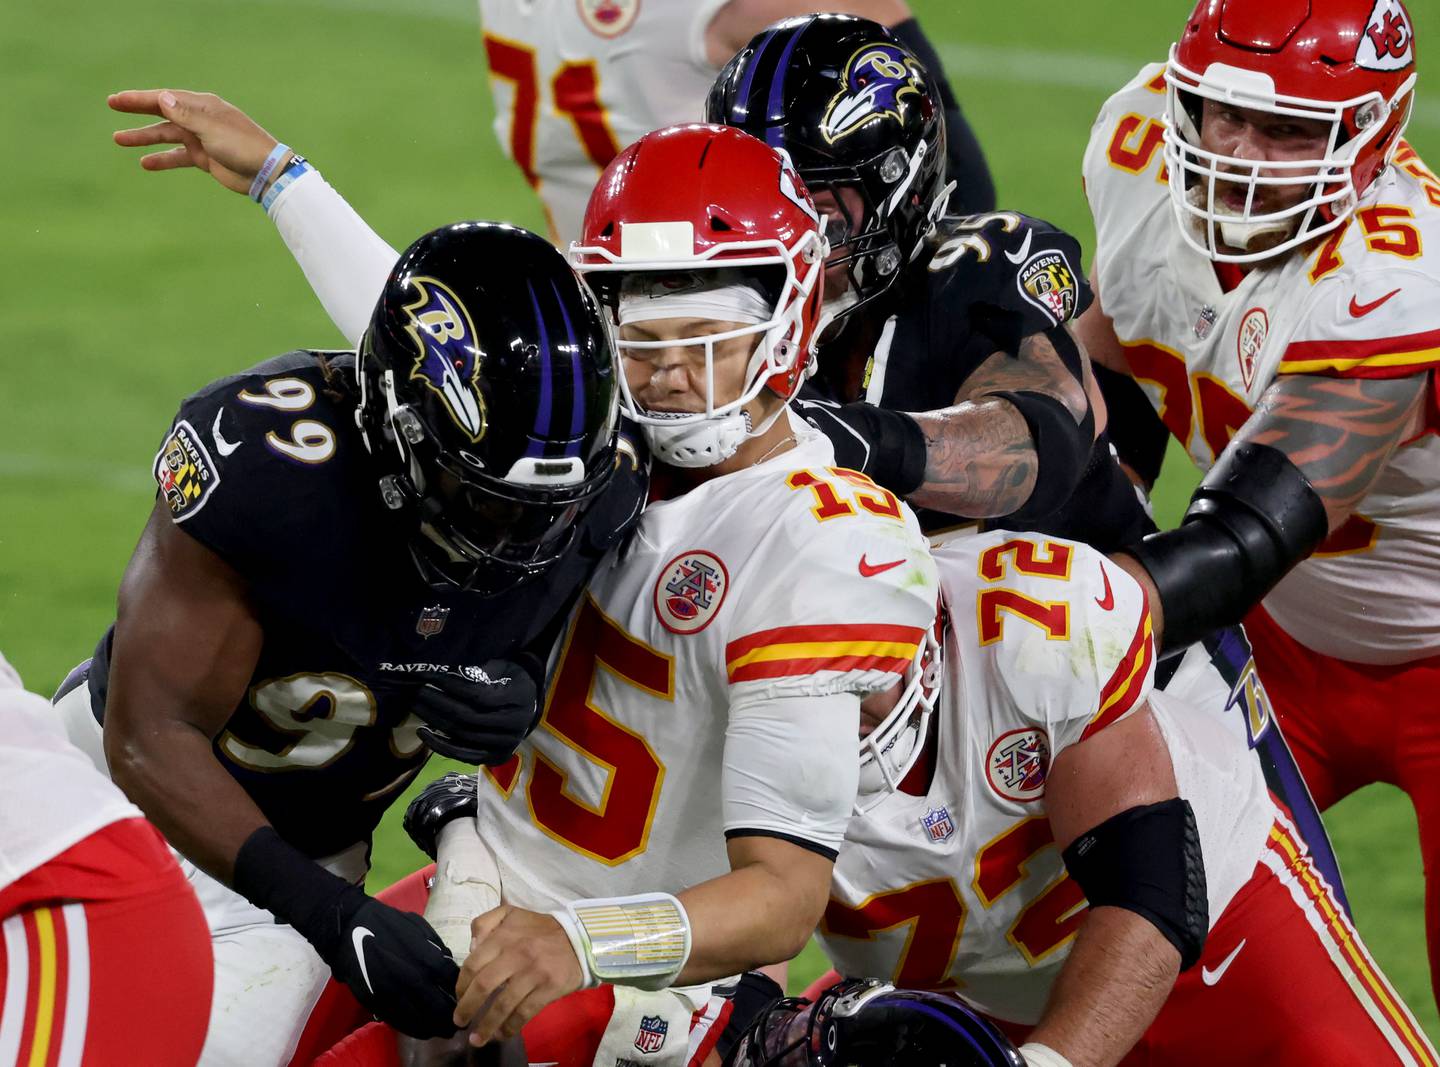 BALTIMORE, MARYLAND - SEPTEMBER 28: Patrick Mahomes #15 of the Kansas City Chiefs is tackled by Matt Judon #99 and Derek Wolfe #95 of the Baltimore Ravens at M&T Bank Stadium on September 28, 2020 in Baltimore, Maryland.